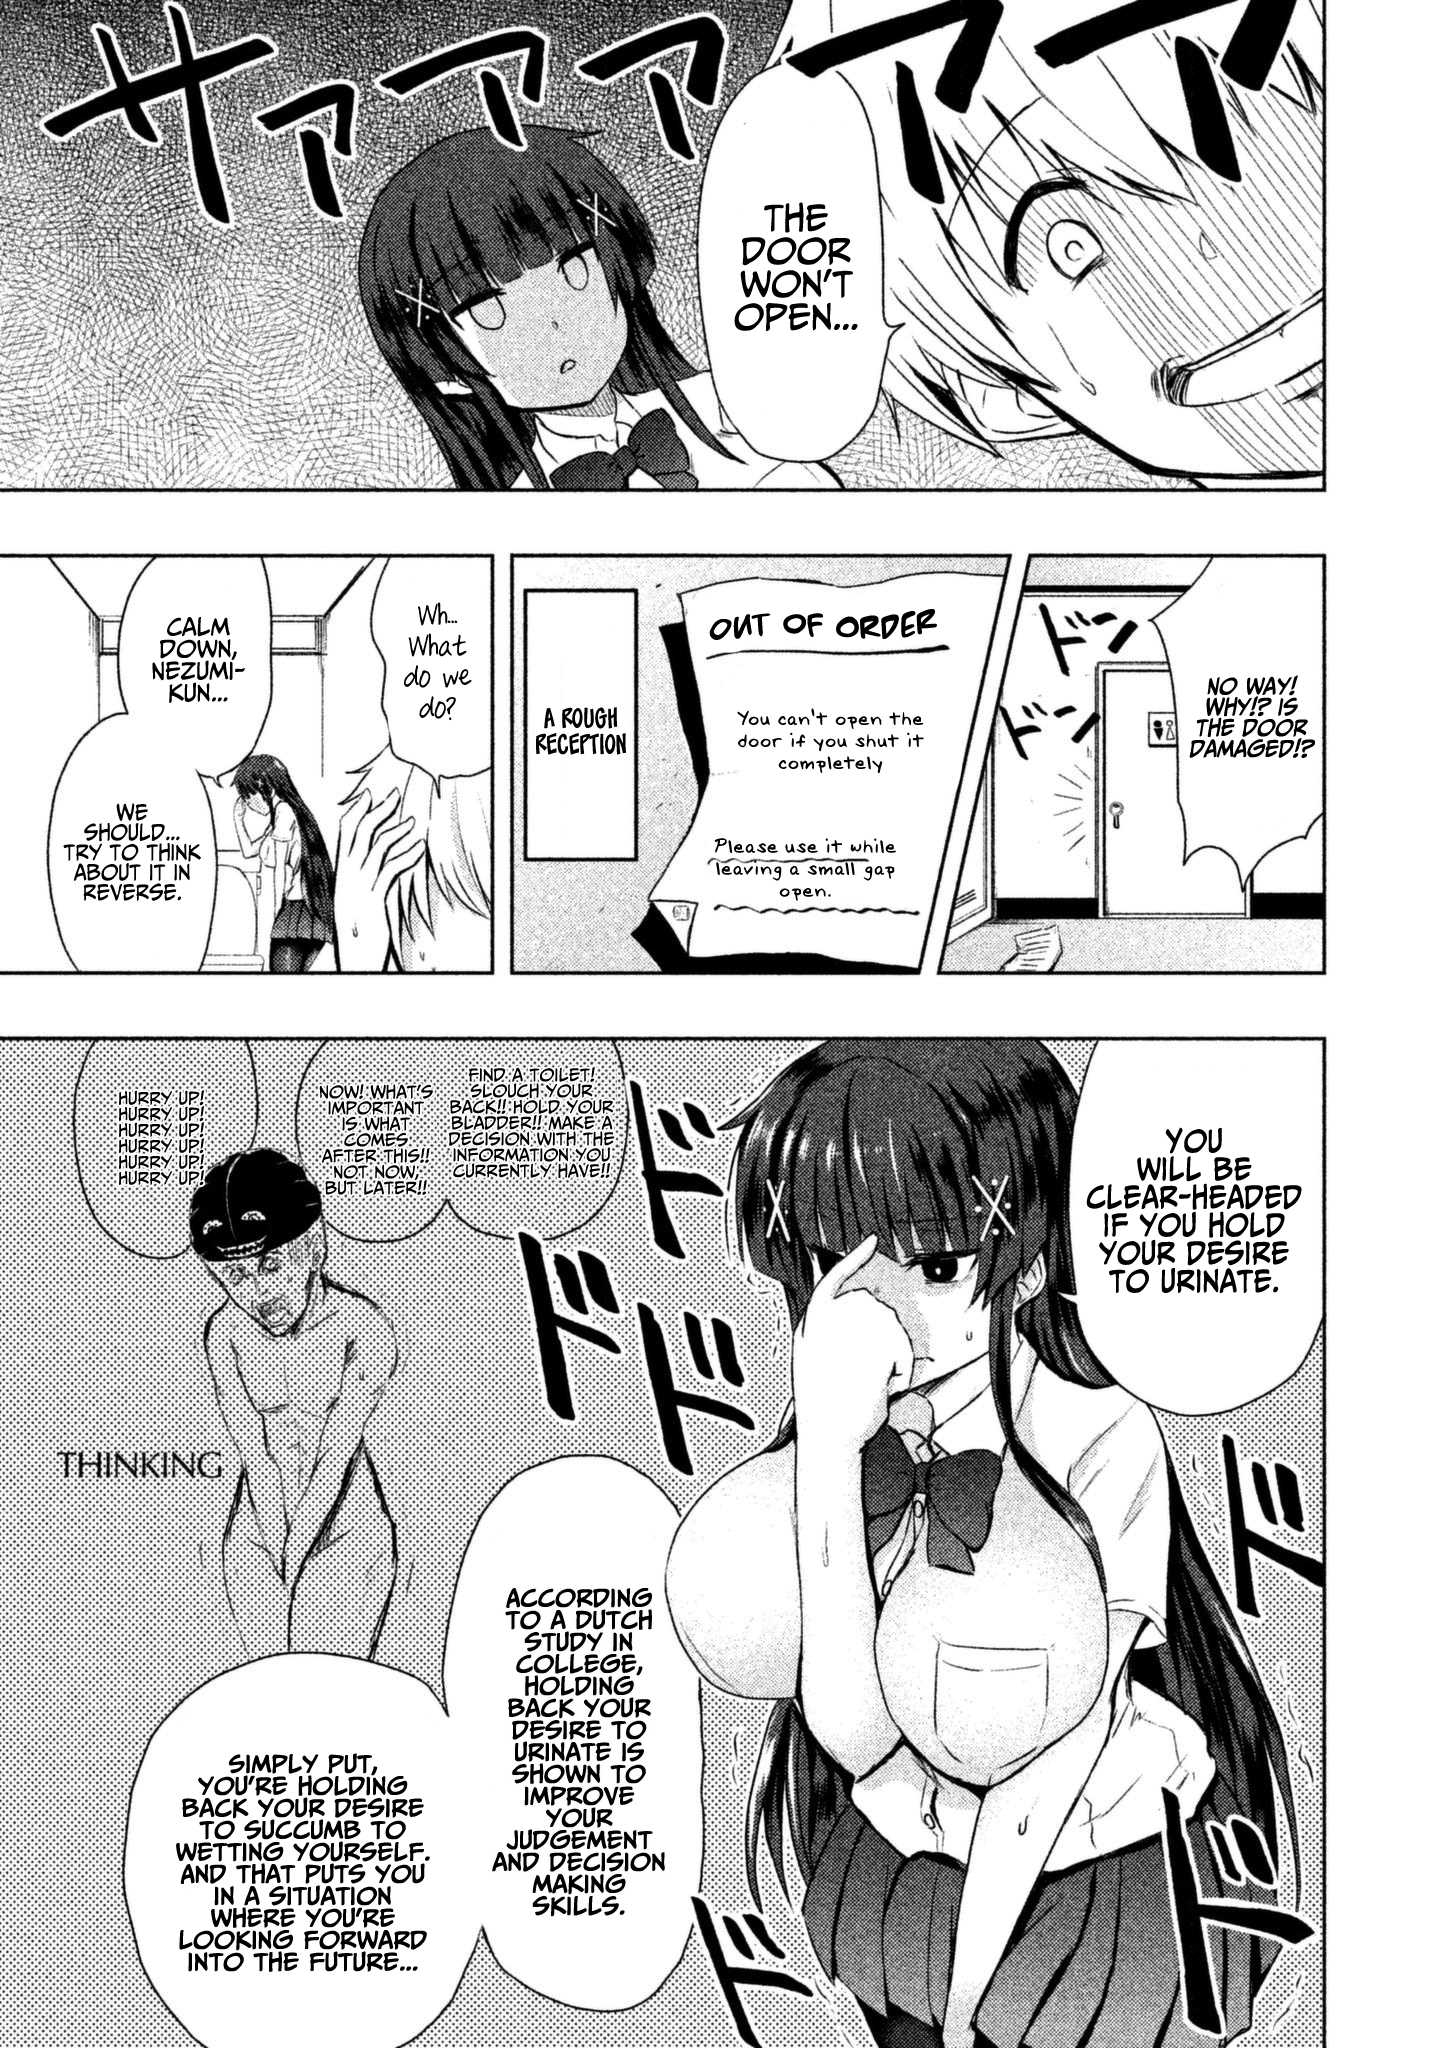 A Girl Who Is Very Well-Informed About Weird Knowledge, Takayukashiki Souko-San Chapter 13 #4